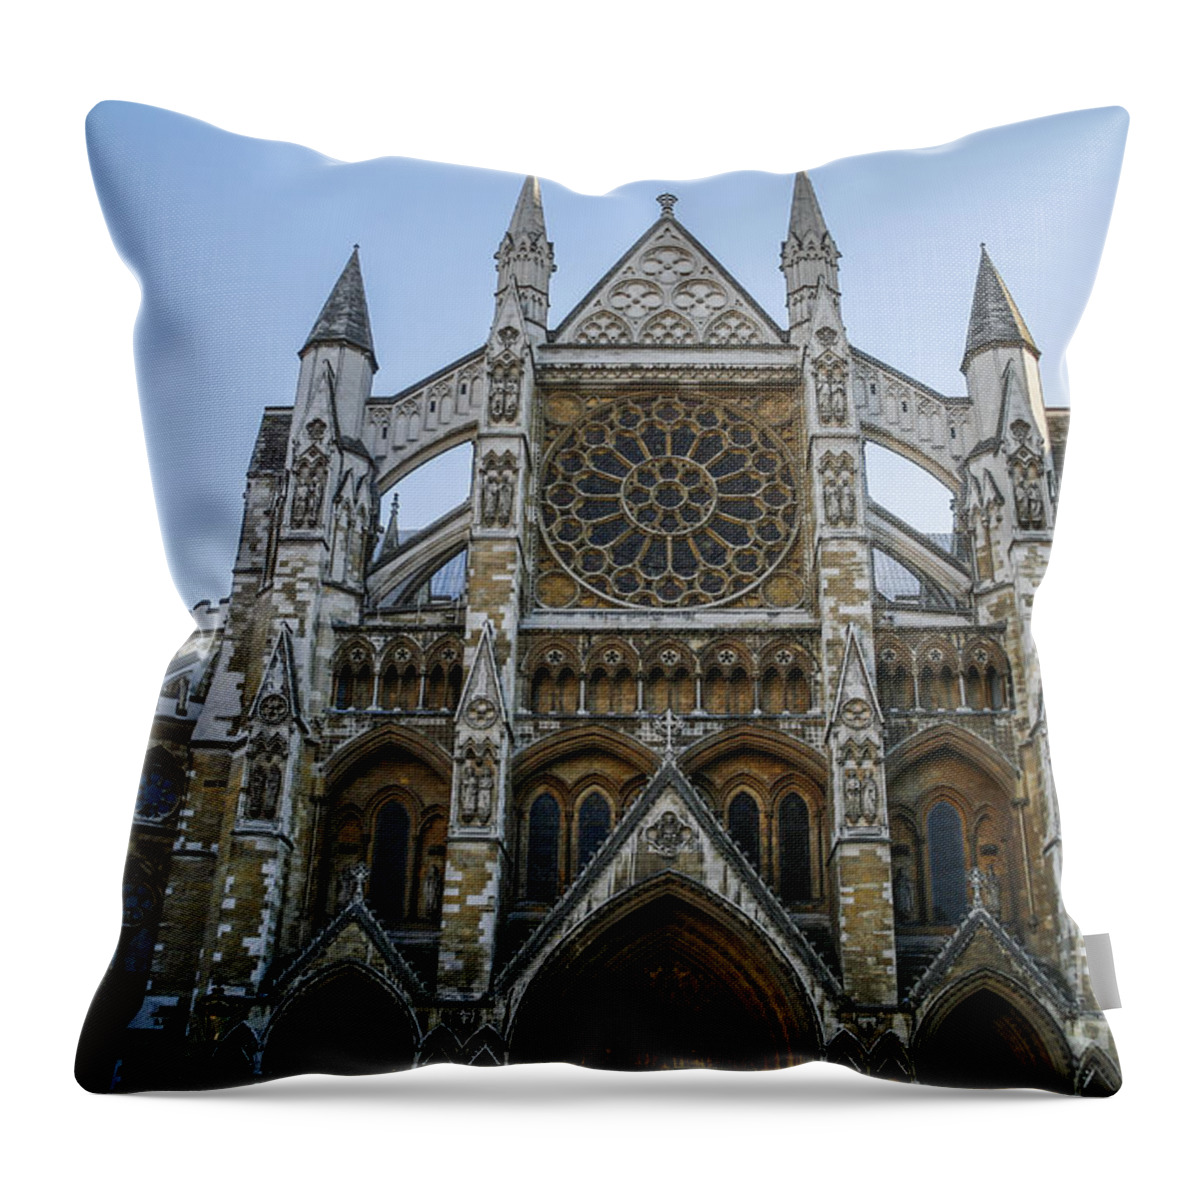 Abbey Throw Pillow featuring the photograph Westminster Abbey by Patricia Hofmeester